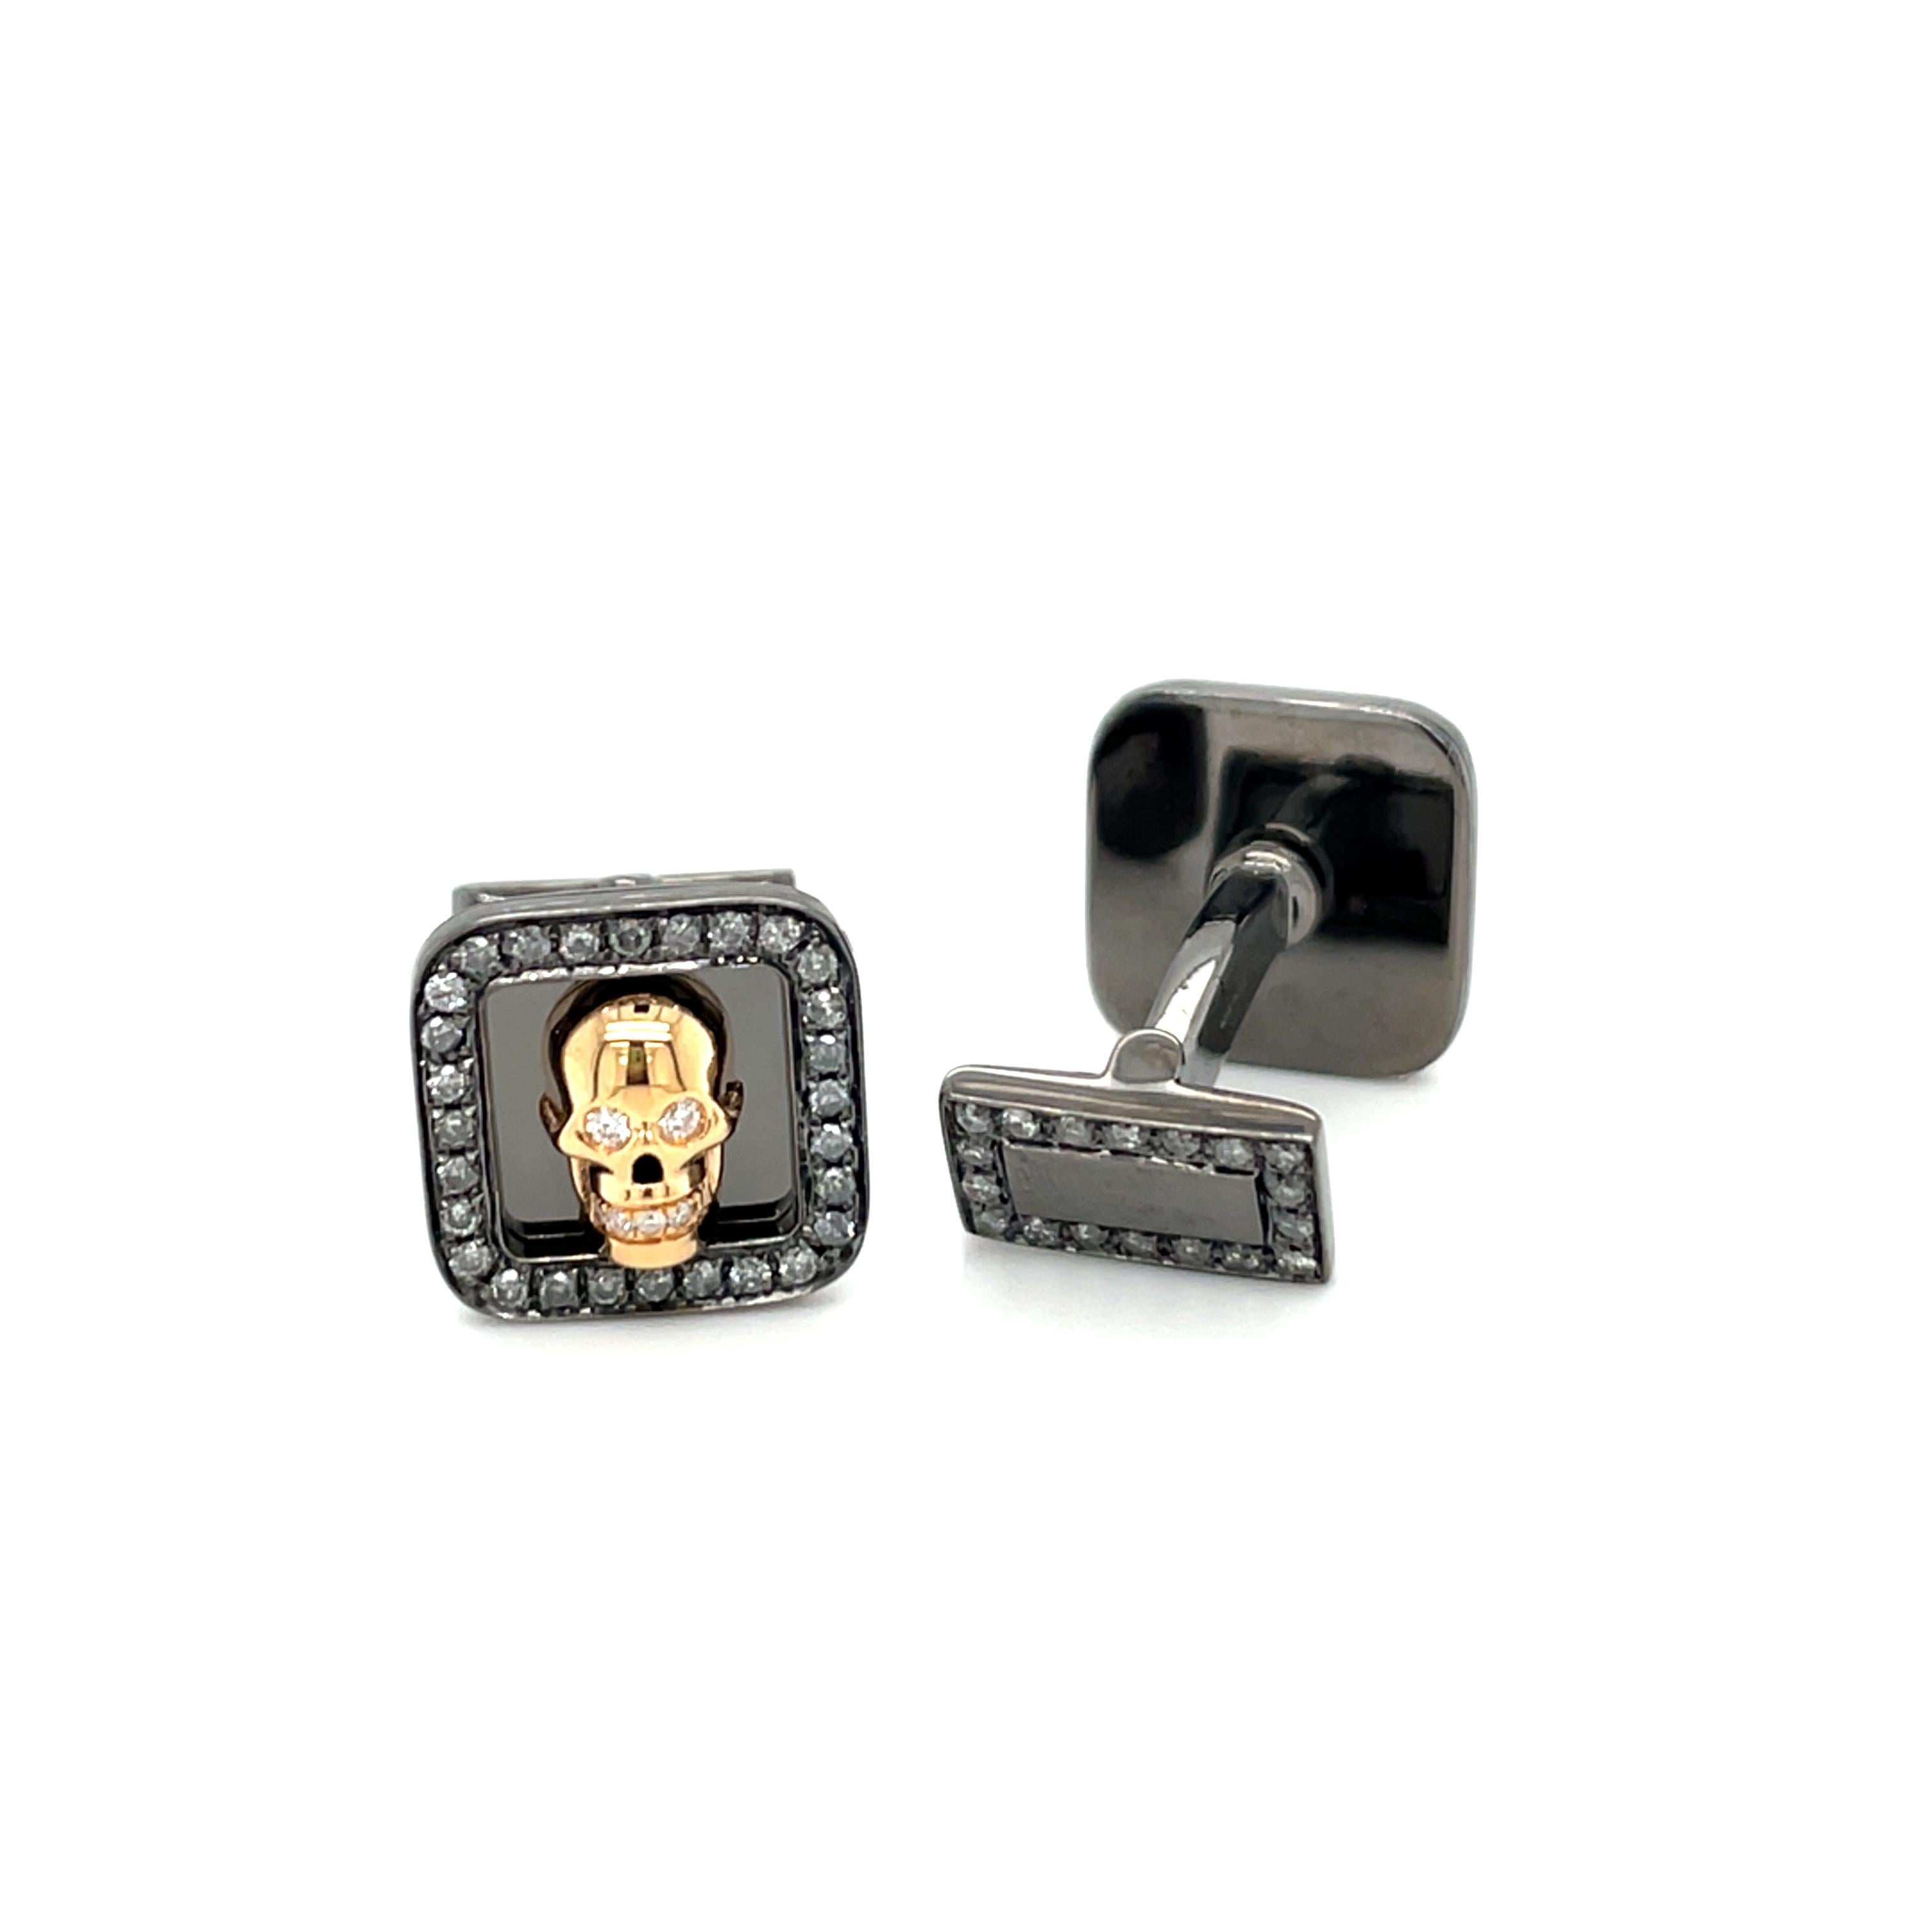 These 18K white gold special cufflinks are from Timeless  Collection. These very unique cufflinks are made with white gold (black rhodium) and gray diamonds  of 0.82 Carat. These cufflinks are a perfect upgrade to every special occasion.

This